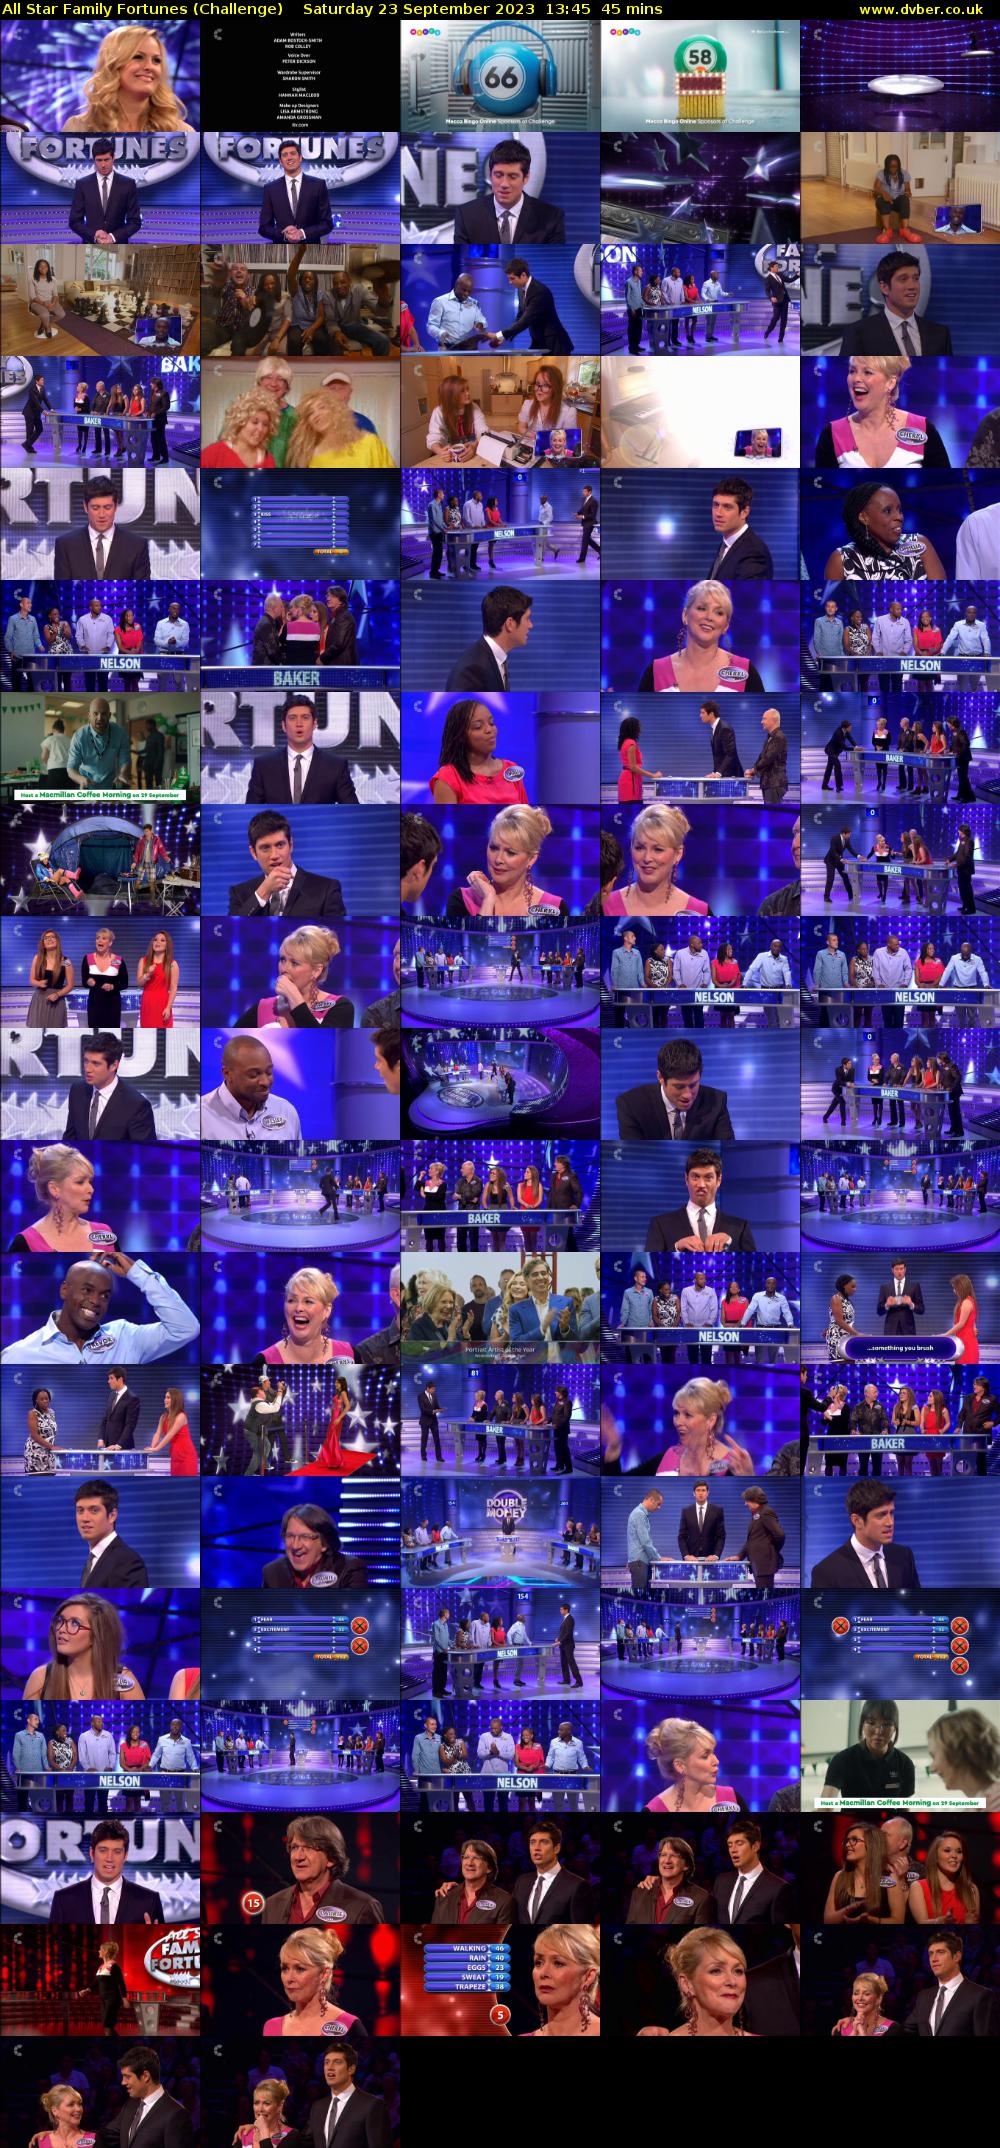 All Star Family Fortunes (Challenge) Saturday 23 September 2023 13:45 - 14:30